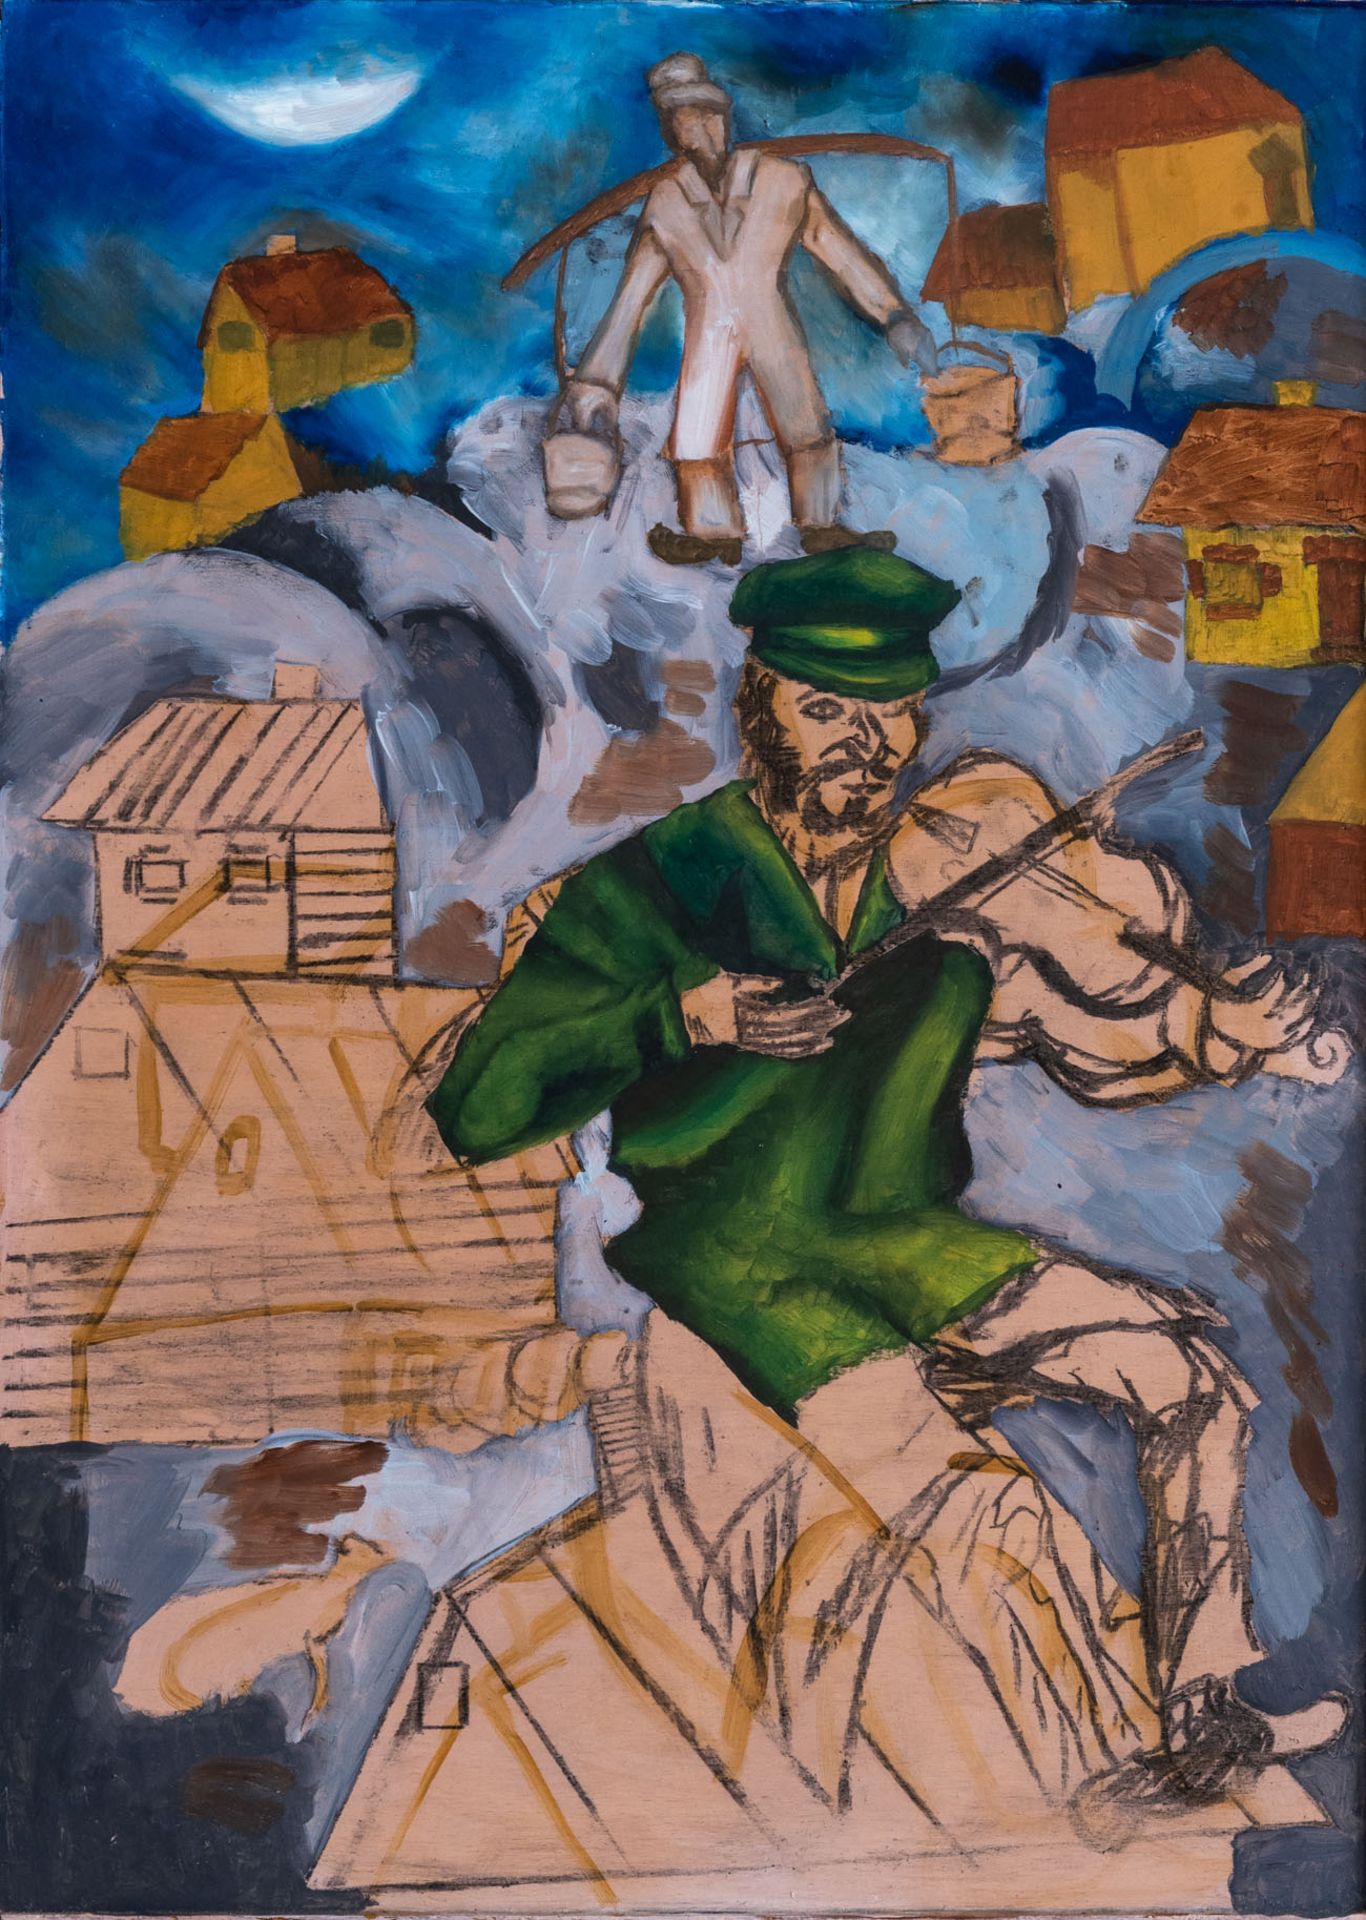 Unidentified Jewish Russian Artist, Early 20th Century, Fiddler on the Roof